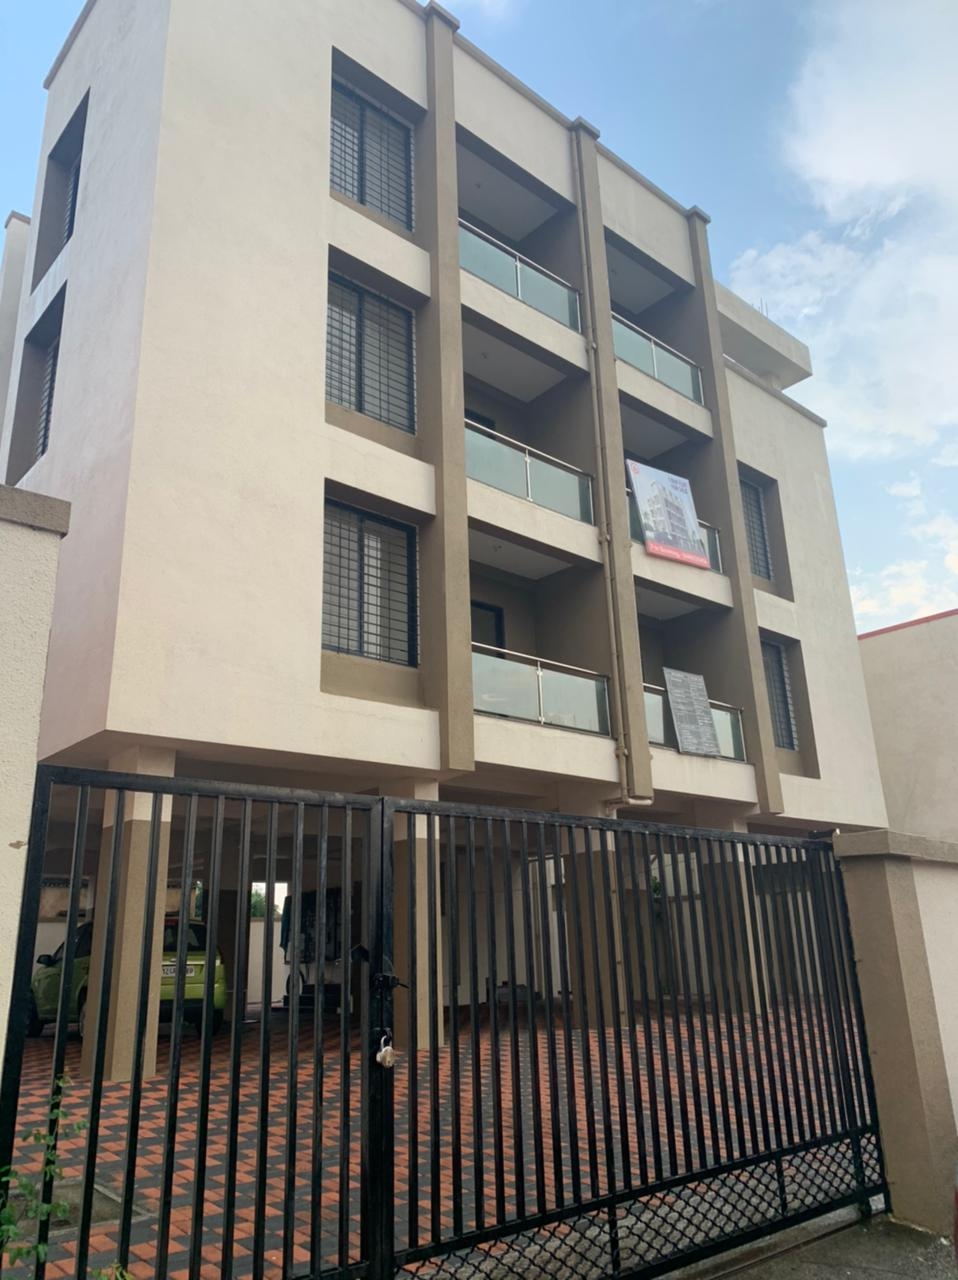 1BHK Flat For Sale in Lohegaon Pune